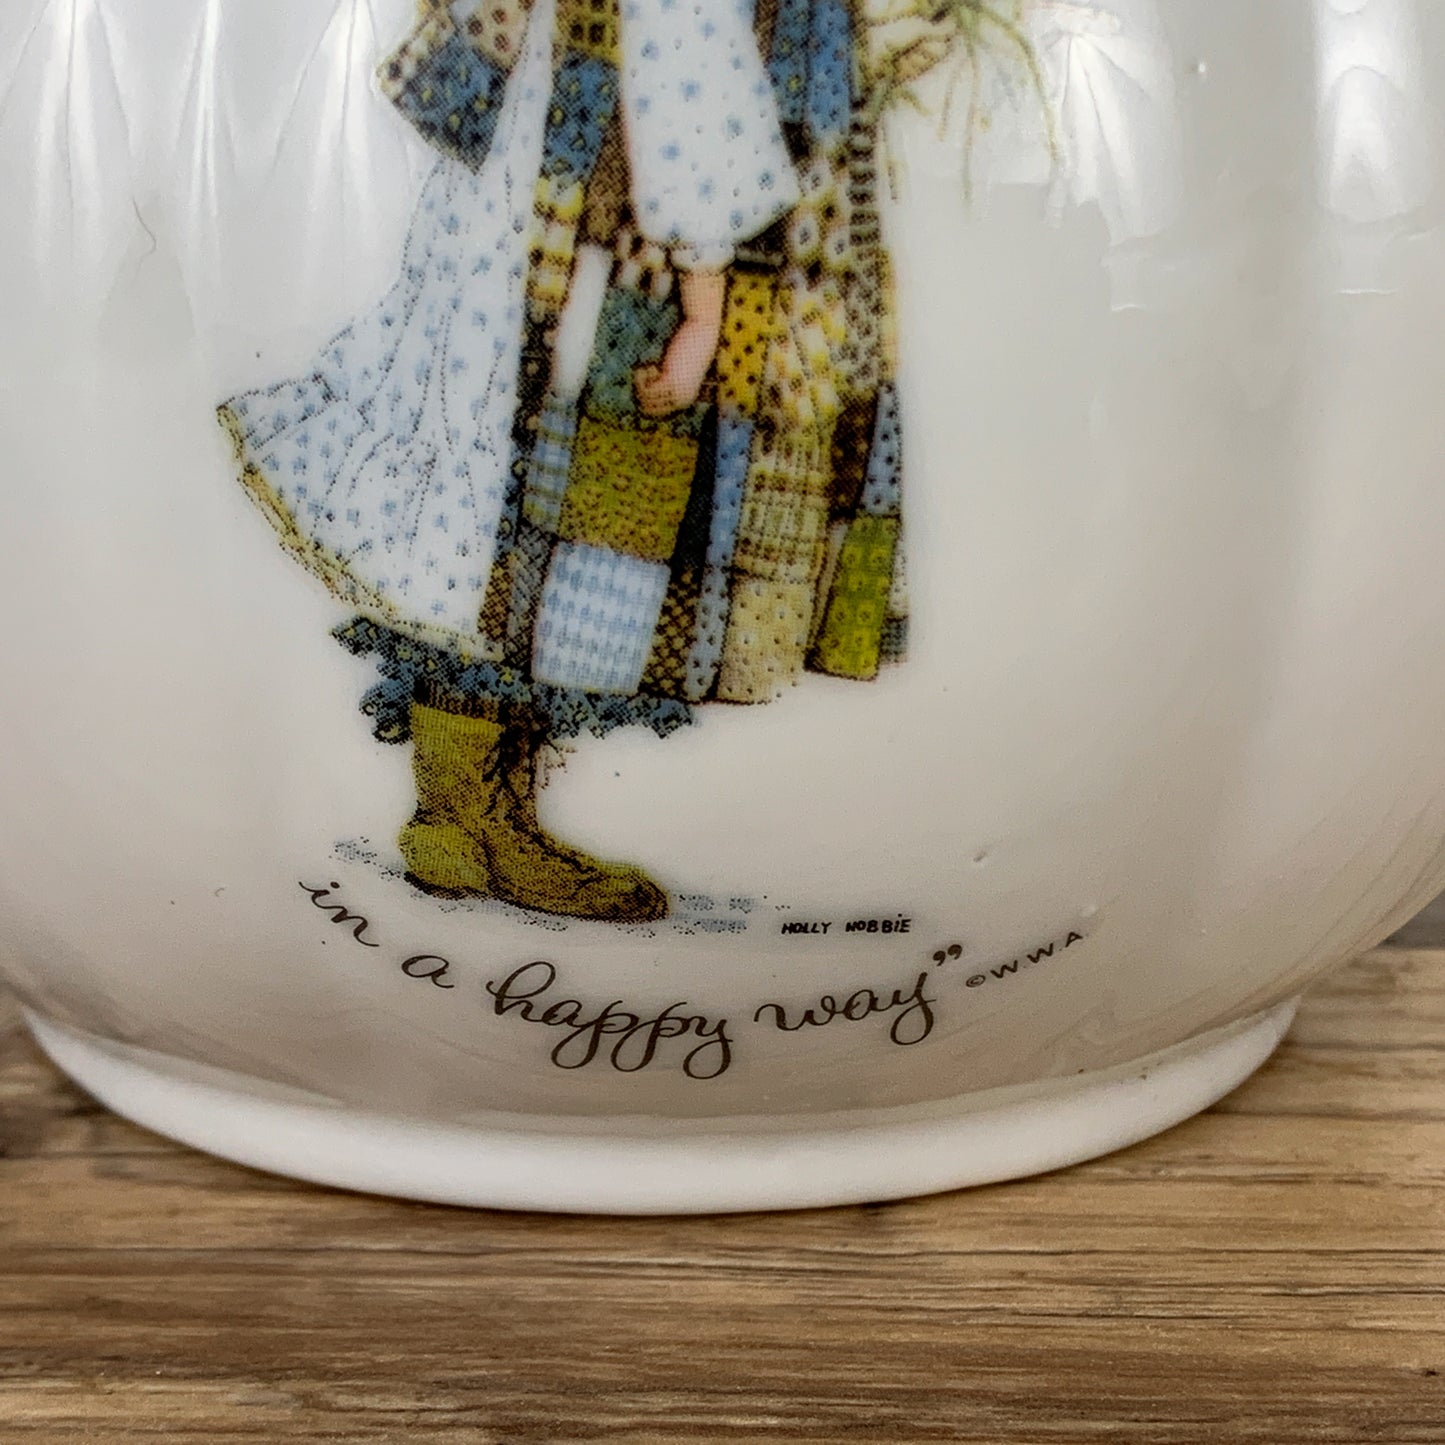 Holly Hobbie White Porcelain Pitcher "Start Each Day in a Happy Way"